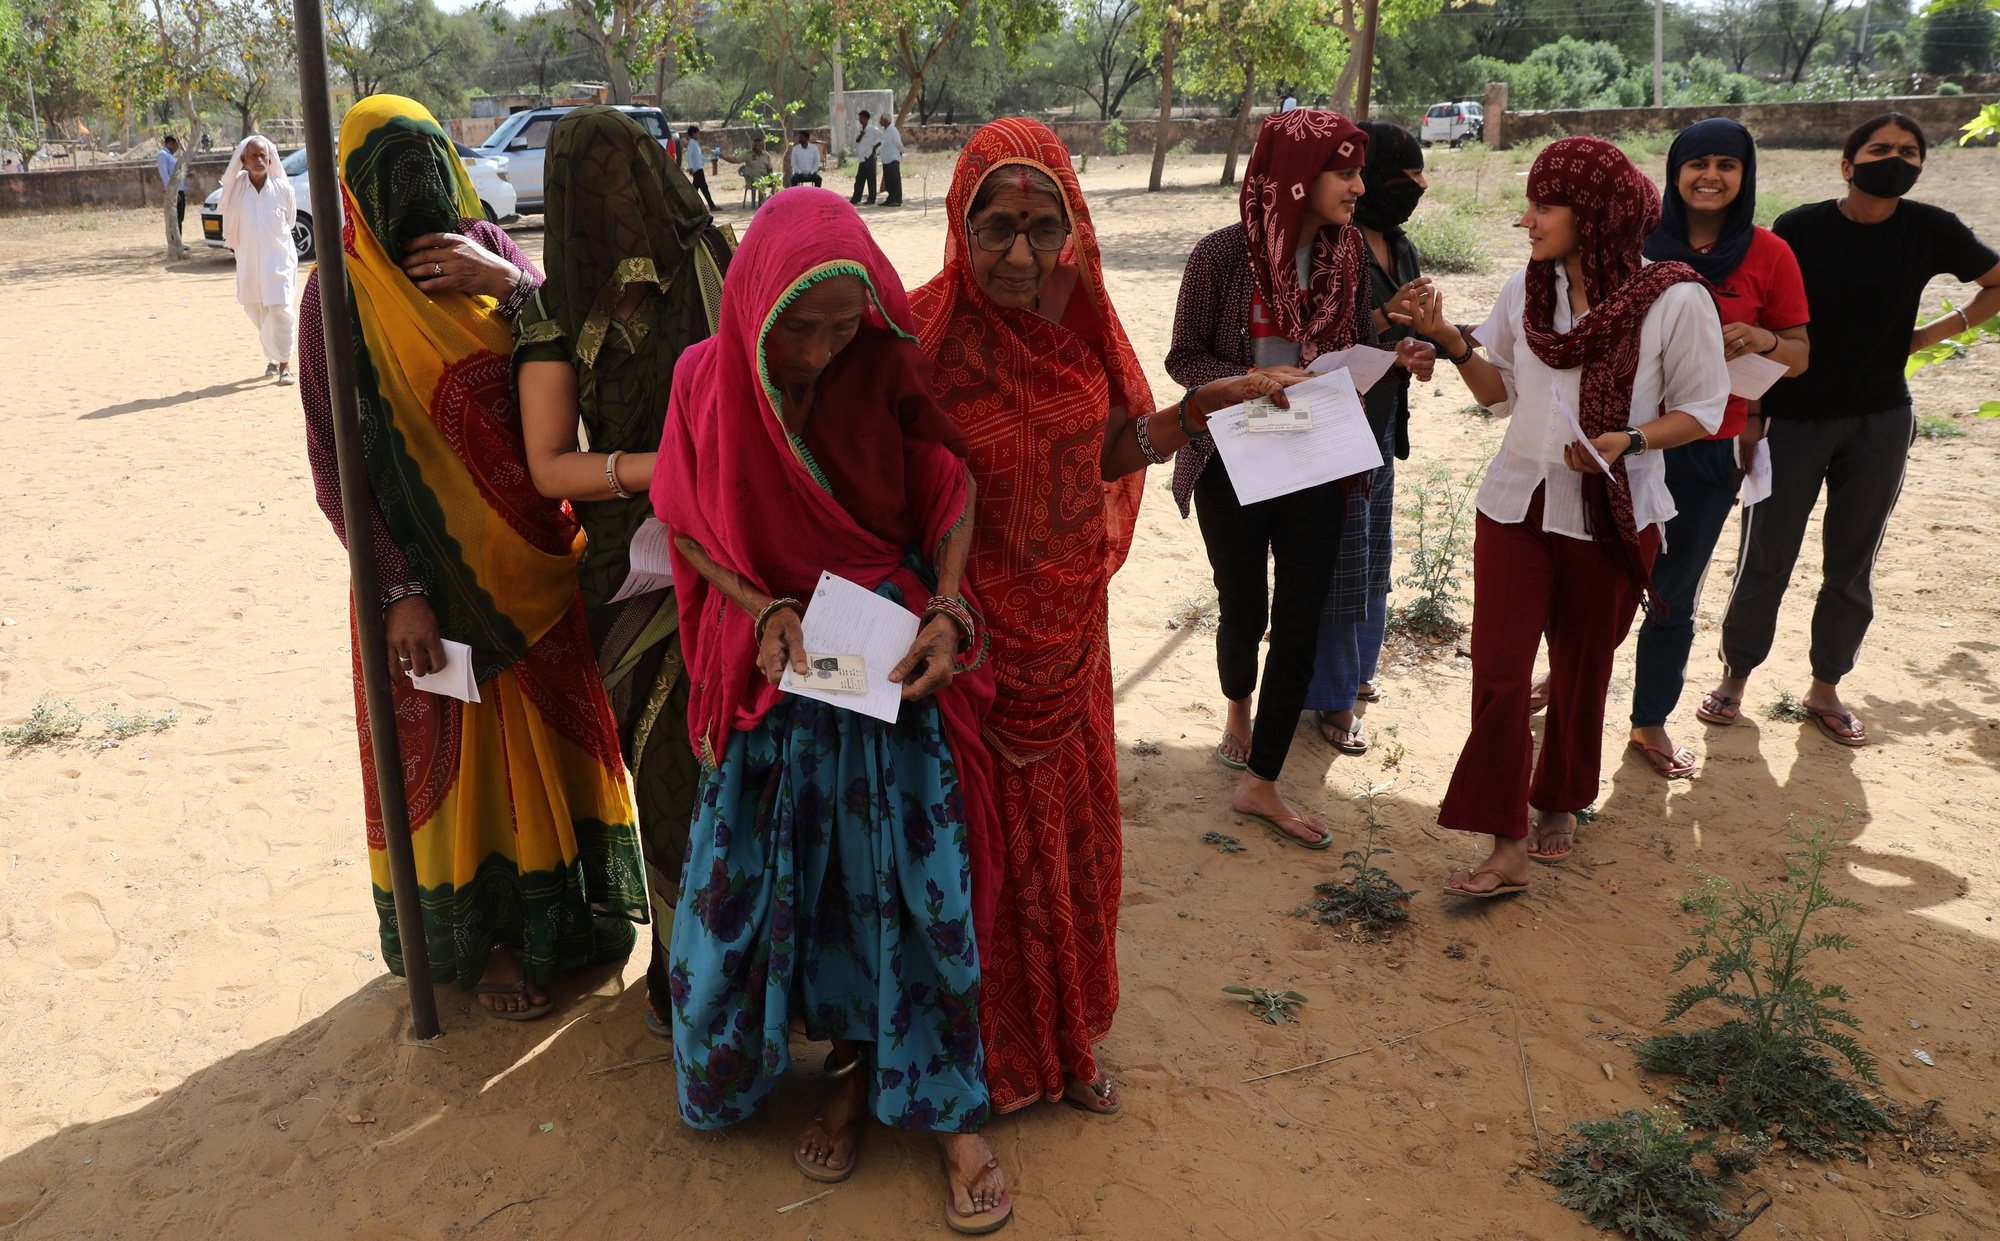 epa11287796 Indian women stand and wait at a polling station to cast their vote in the first phase of the general elections, in Shahpura village, on the outskirts of Jaipur, Rajasthan, India, 19 April 2024. The Indian general elections will be held over seven phases between 19 April and 01 June 2024 with the results being announced on 04 June for the 545-member lower house of parliament, or Lok Sabha. The elections are held every five years, and about 968 million people are eligible to vote.  EPA/RAJAT GUPTA